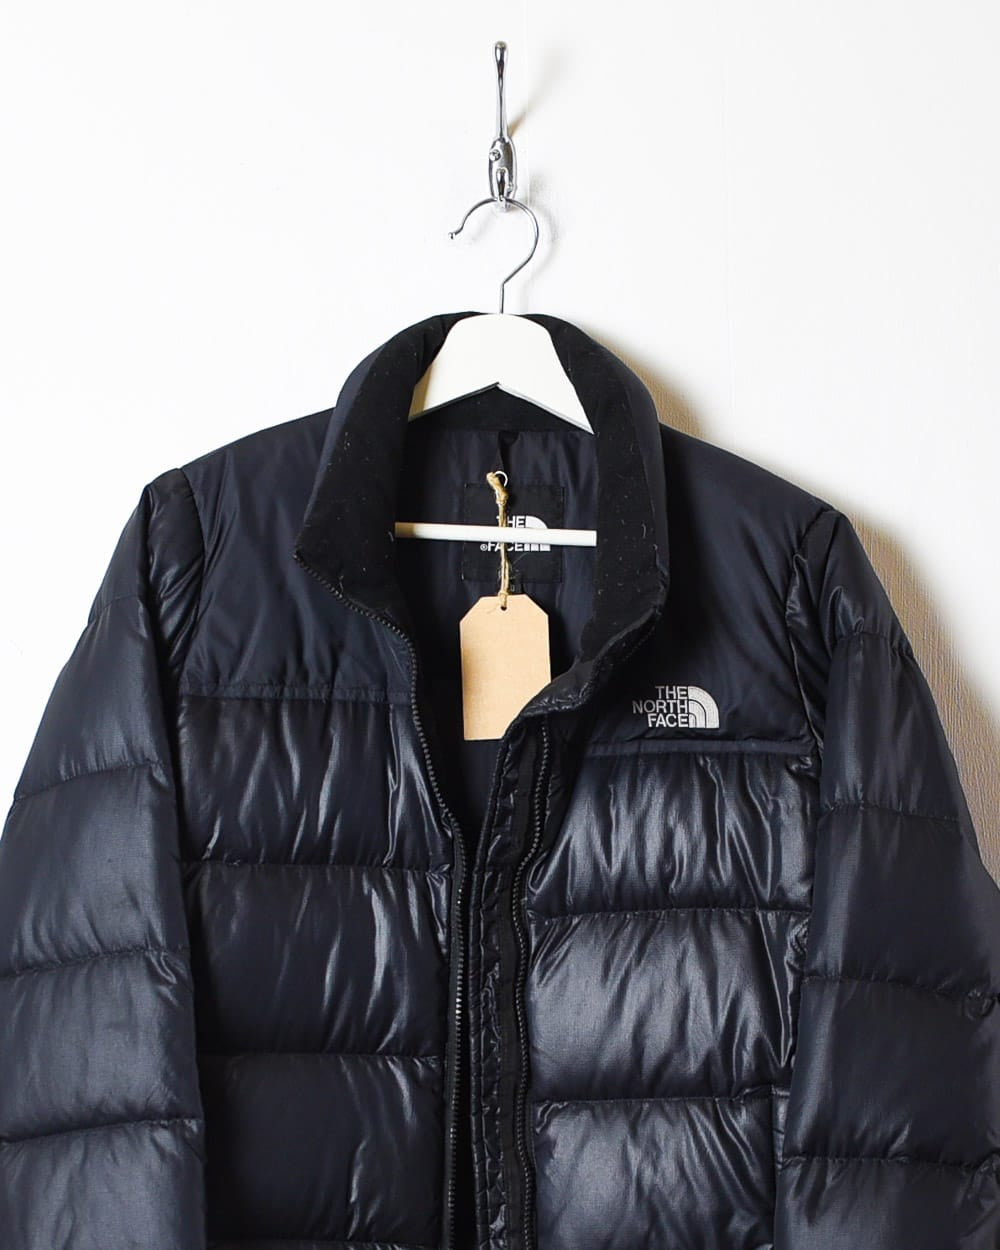 Black The North Face 700 Puffer Jacket - Small Women's